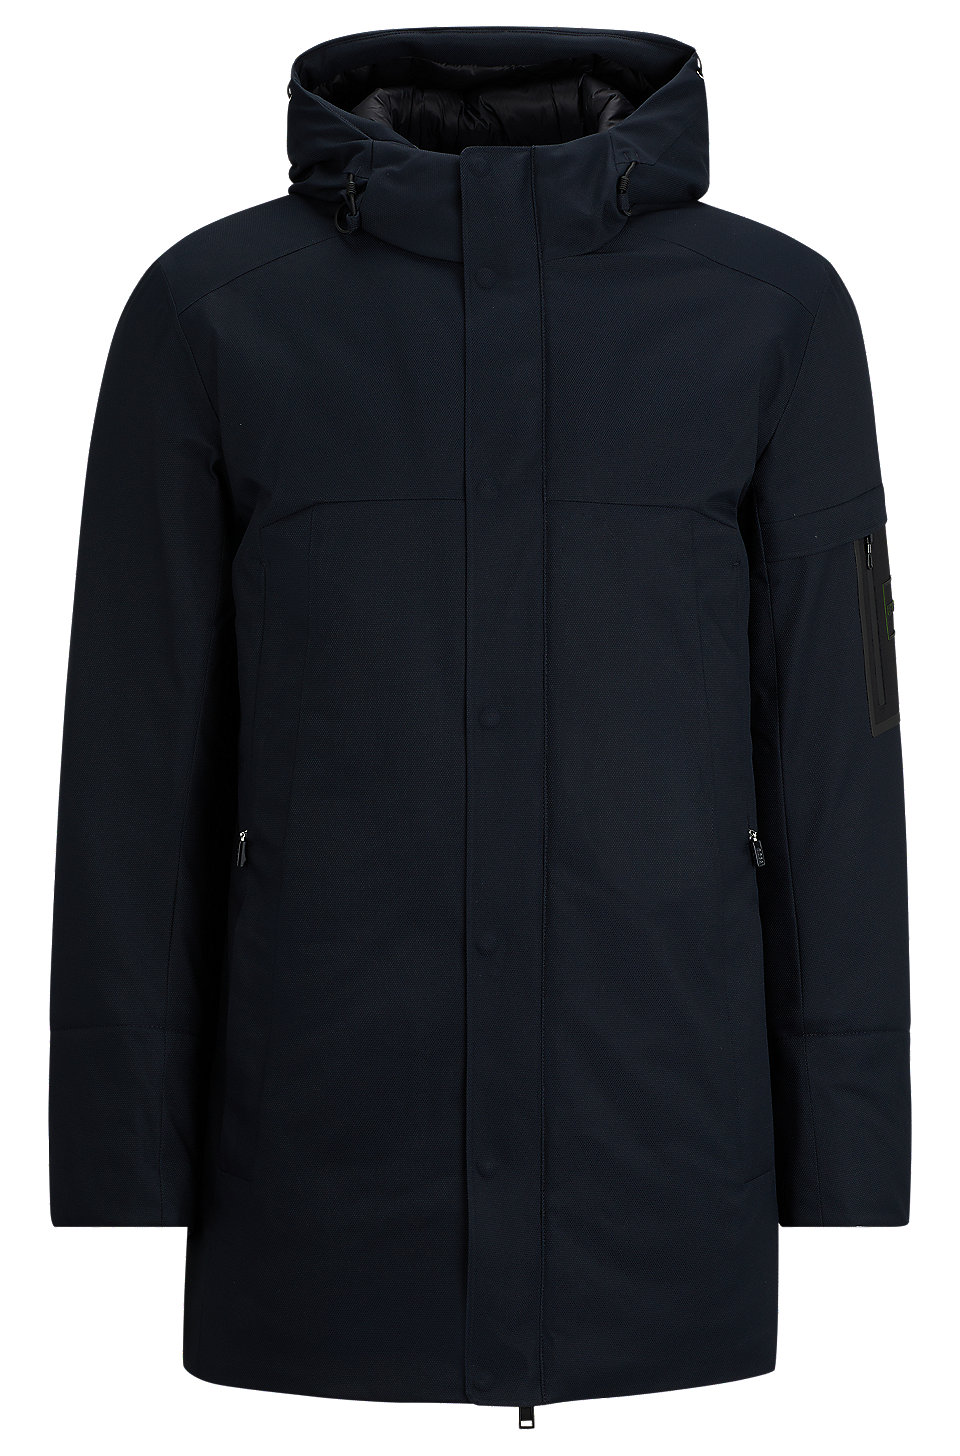 BOSS - Water-repellent parka jacket with logo sleeve pocket